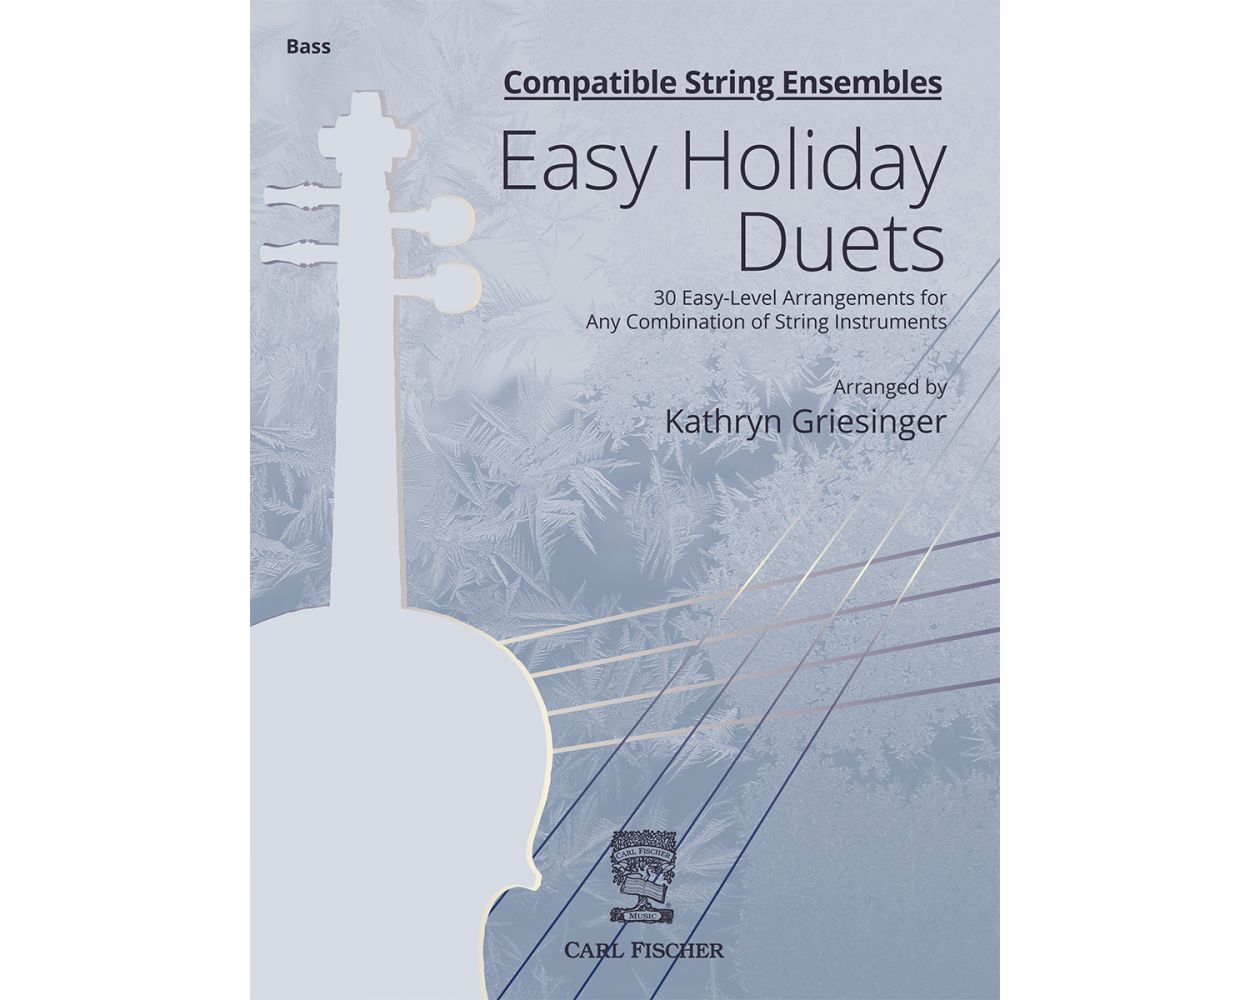 Easy Holiday Duets, Compatible String Ensembles